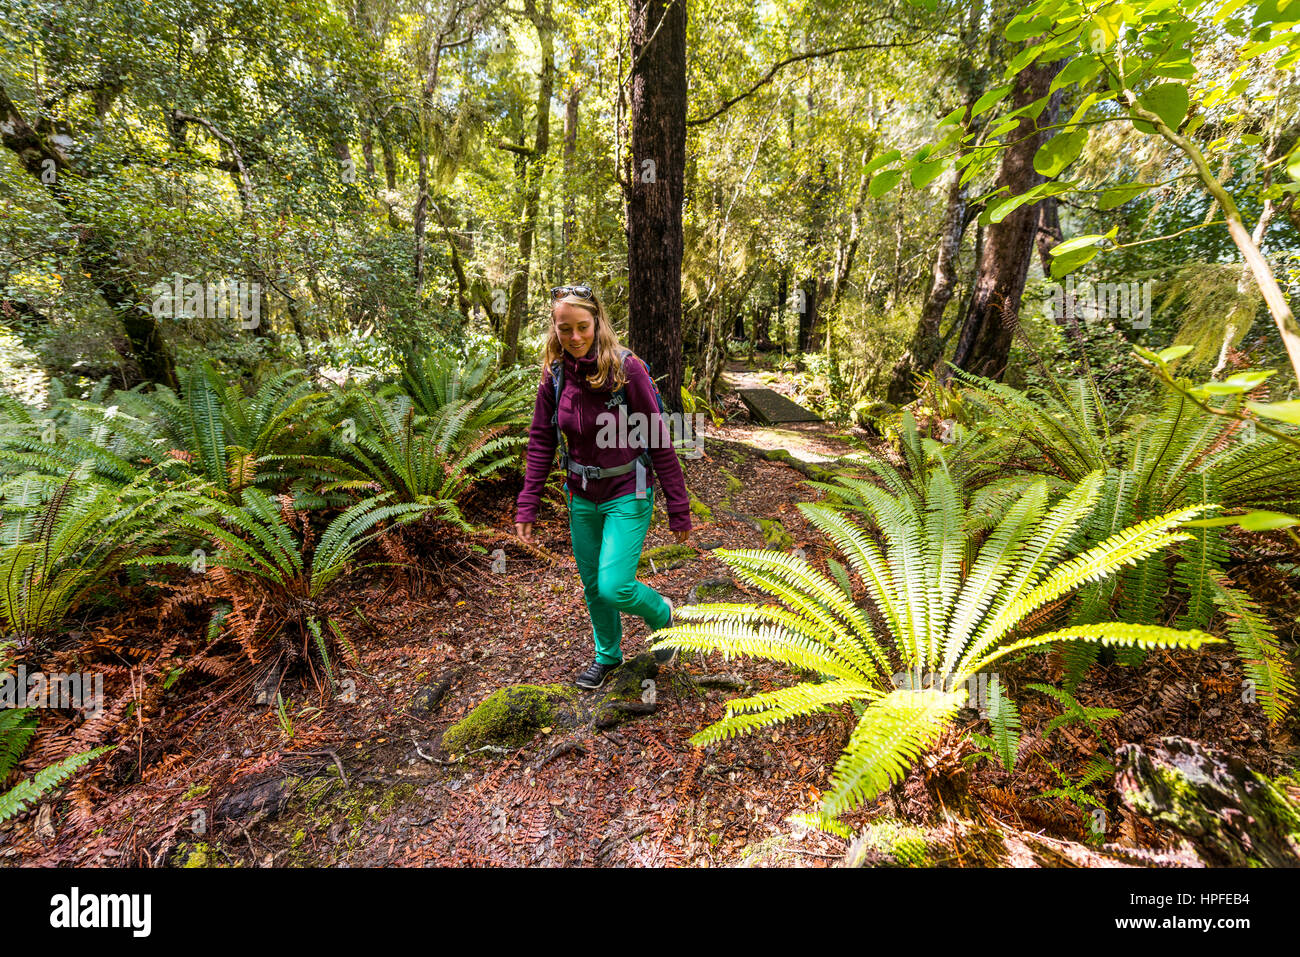 Hiker walking through forest with tree ferns, Abel Tasman National Park, Southland, New Zealand Stock Photo